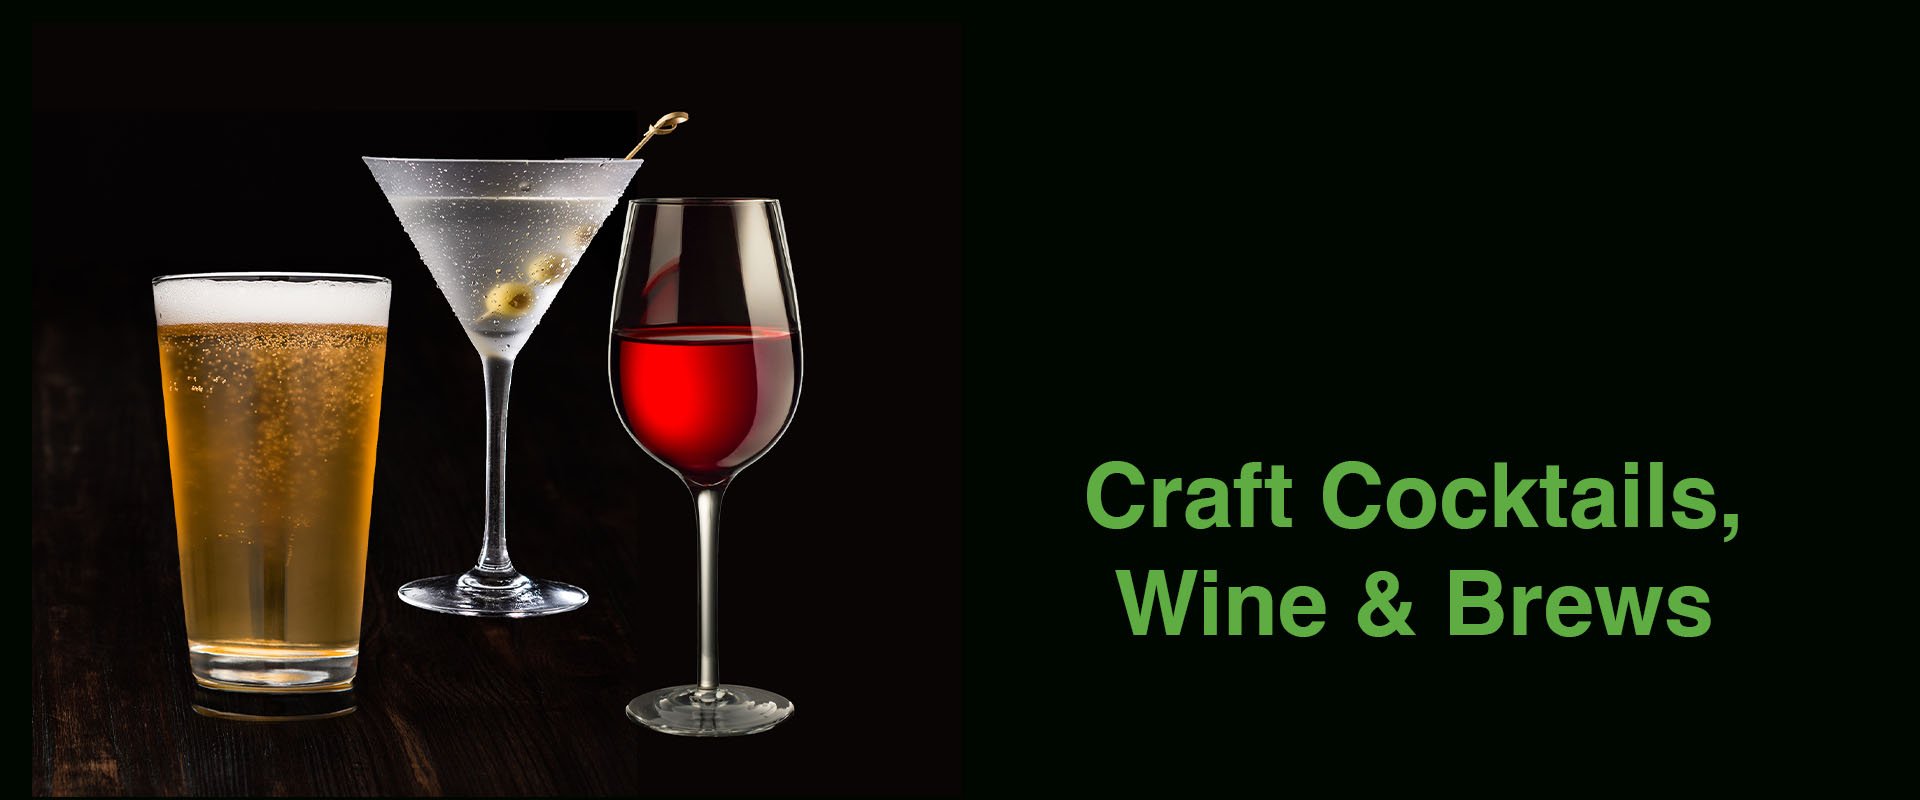 Craft Cocktails, Wine and Brews